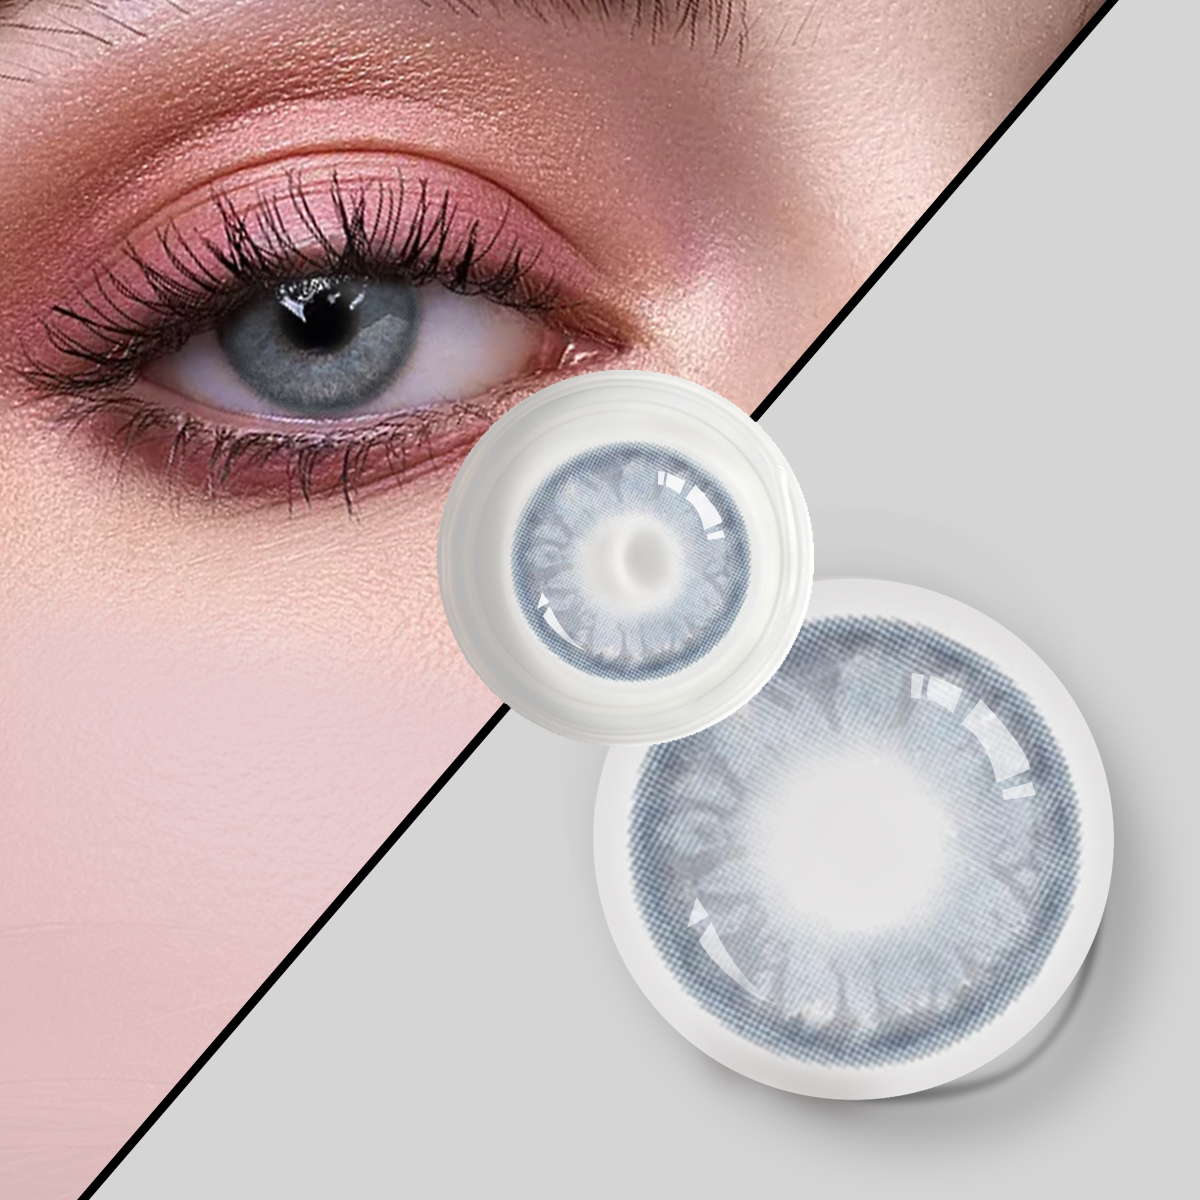 DBeyes Contact lens colored Blue Colored Contacts contact lenses with measure customized